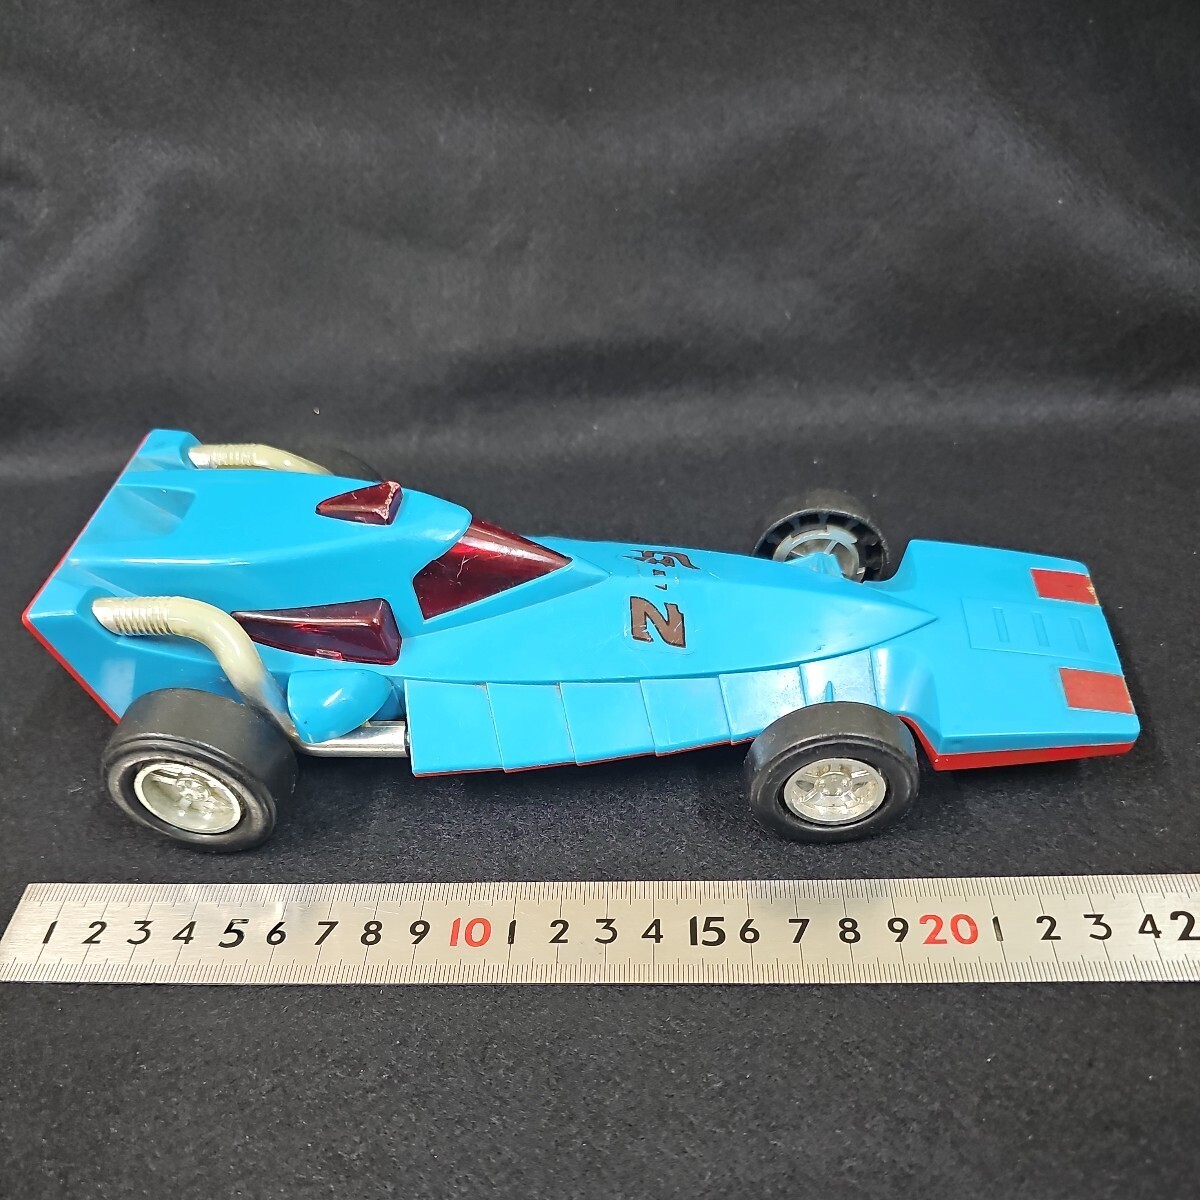  ten thousand . special sport car G-2 number friction mileage that time thing Gatchaman 